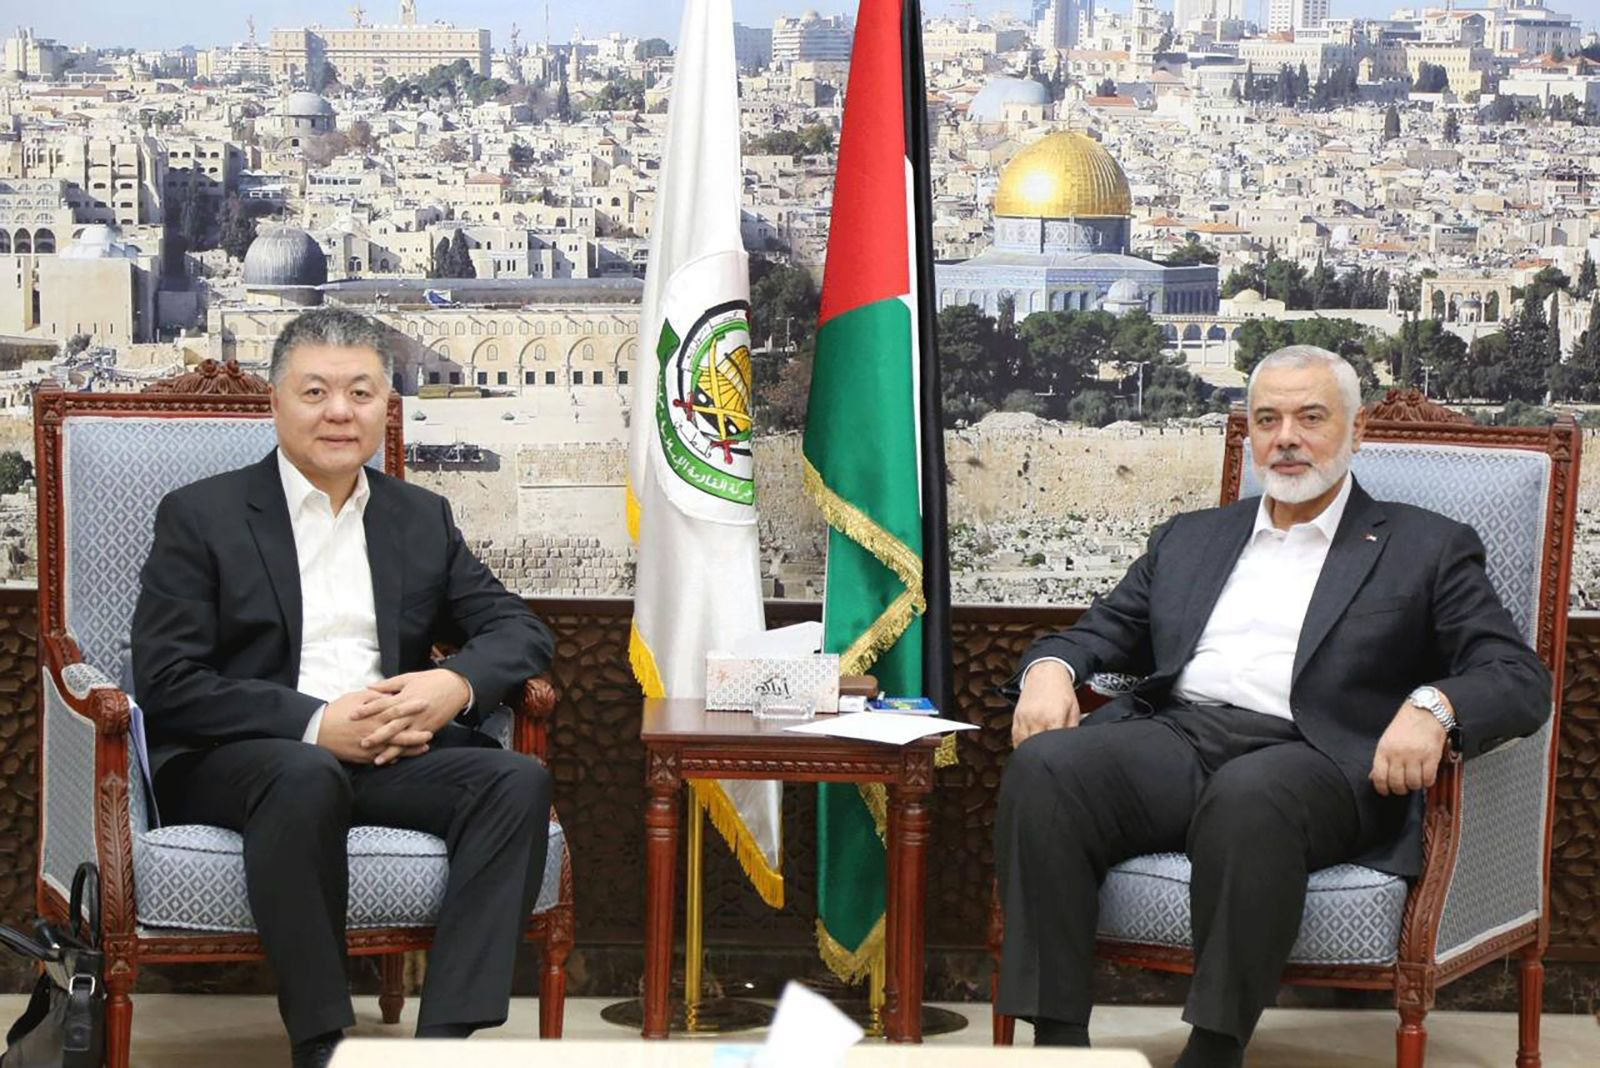 Hamas leader Ismail Haniyeh meets Wang Kejian, an envoy of the Chinese Foreign Ministry, in Qatar on March 17.